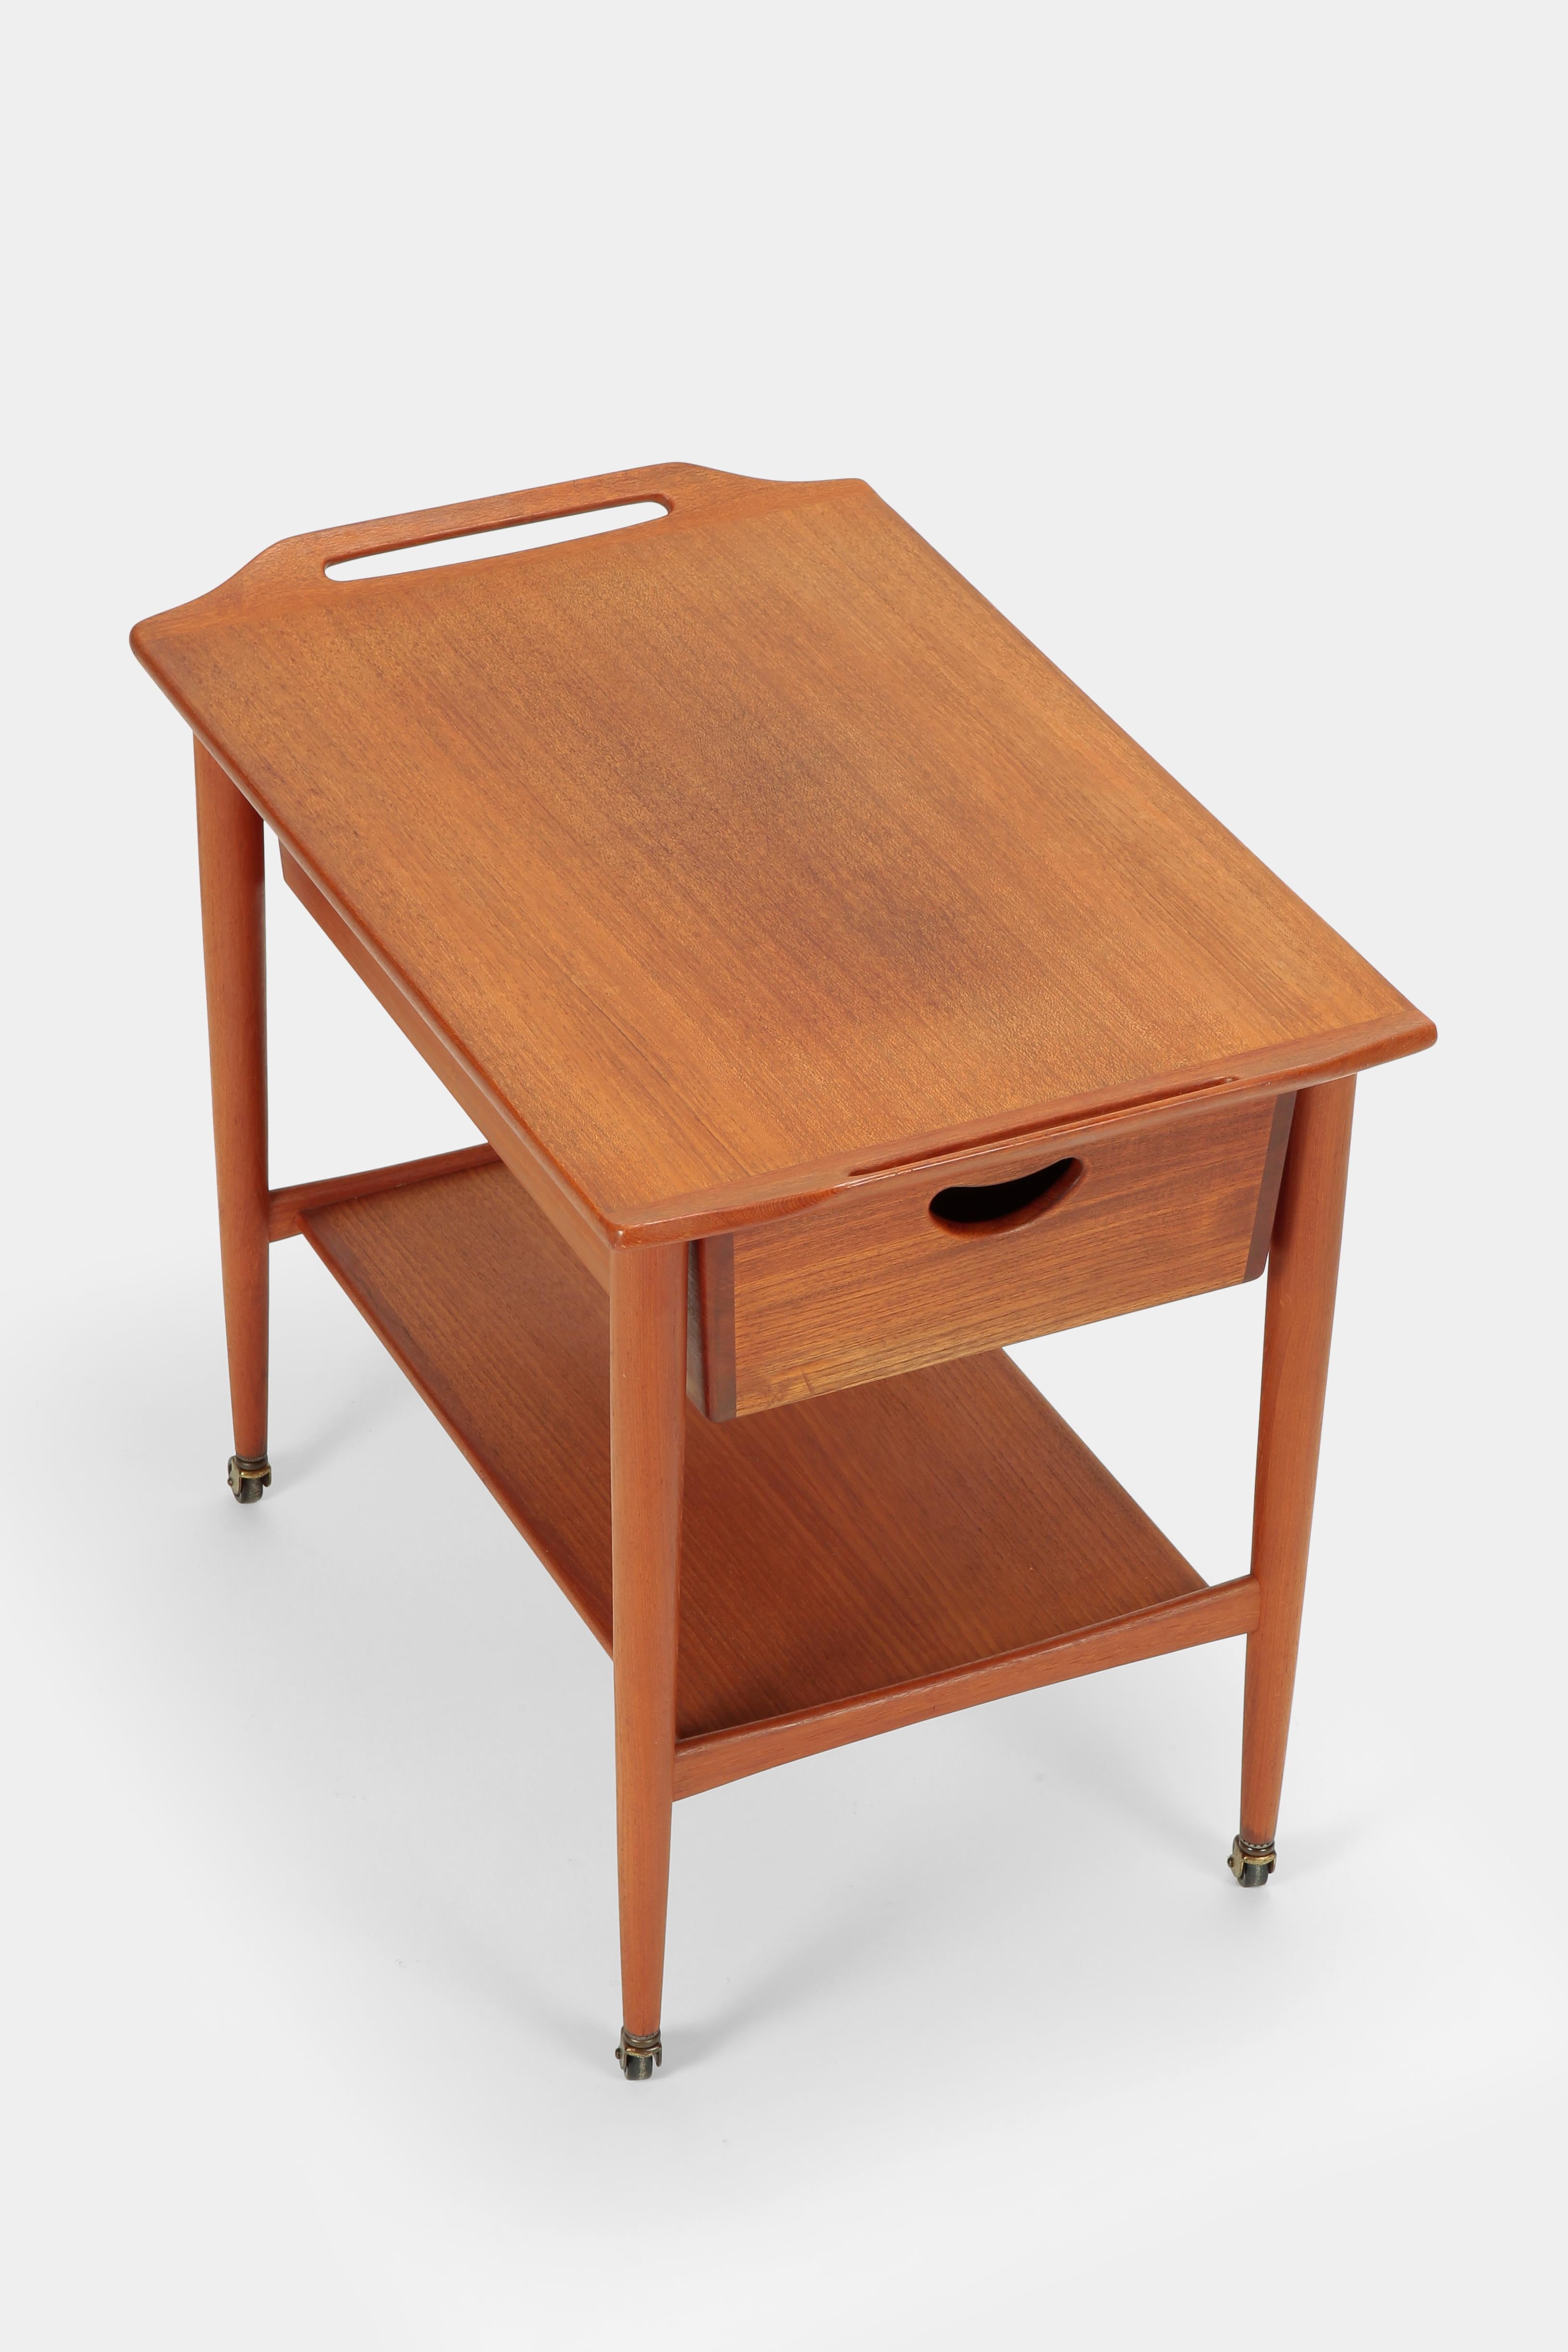 Attributed to Poul Hundevad serving trolley manufactured in the 1950s in Denmark. Serving trolley with solid teak parts. Under the veneered table top there is a spacious drawer that can be pulled out from both sides. Danish craftsmanship and design